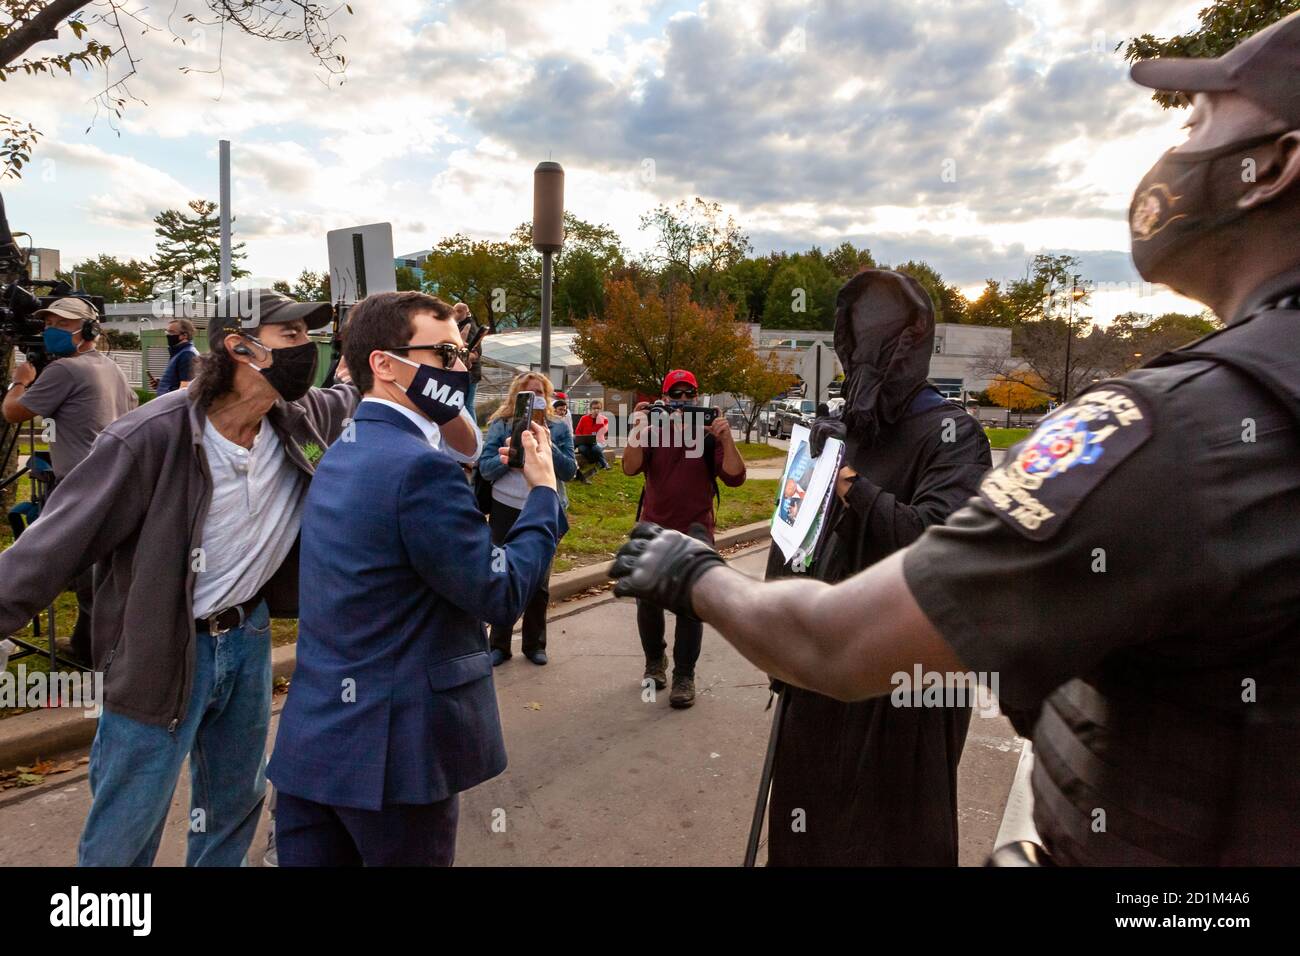 Bethesda, MD, USA, 5 October, 2020.  Pictured:  A Montgomery County Maryland police officer steps in to stop rapidly escalating verbal and physical aggression by Trump suporters against a man dressed as the Grim Reaper.  Trump supporters gathered outside Walter Reed National Military Medical Center where the President was hospitalized for covid-19 following infection by the novel coronavirus.  Credit: Allison C Bailey/Alamy Live News Stock Photo